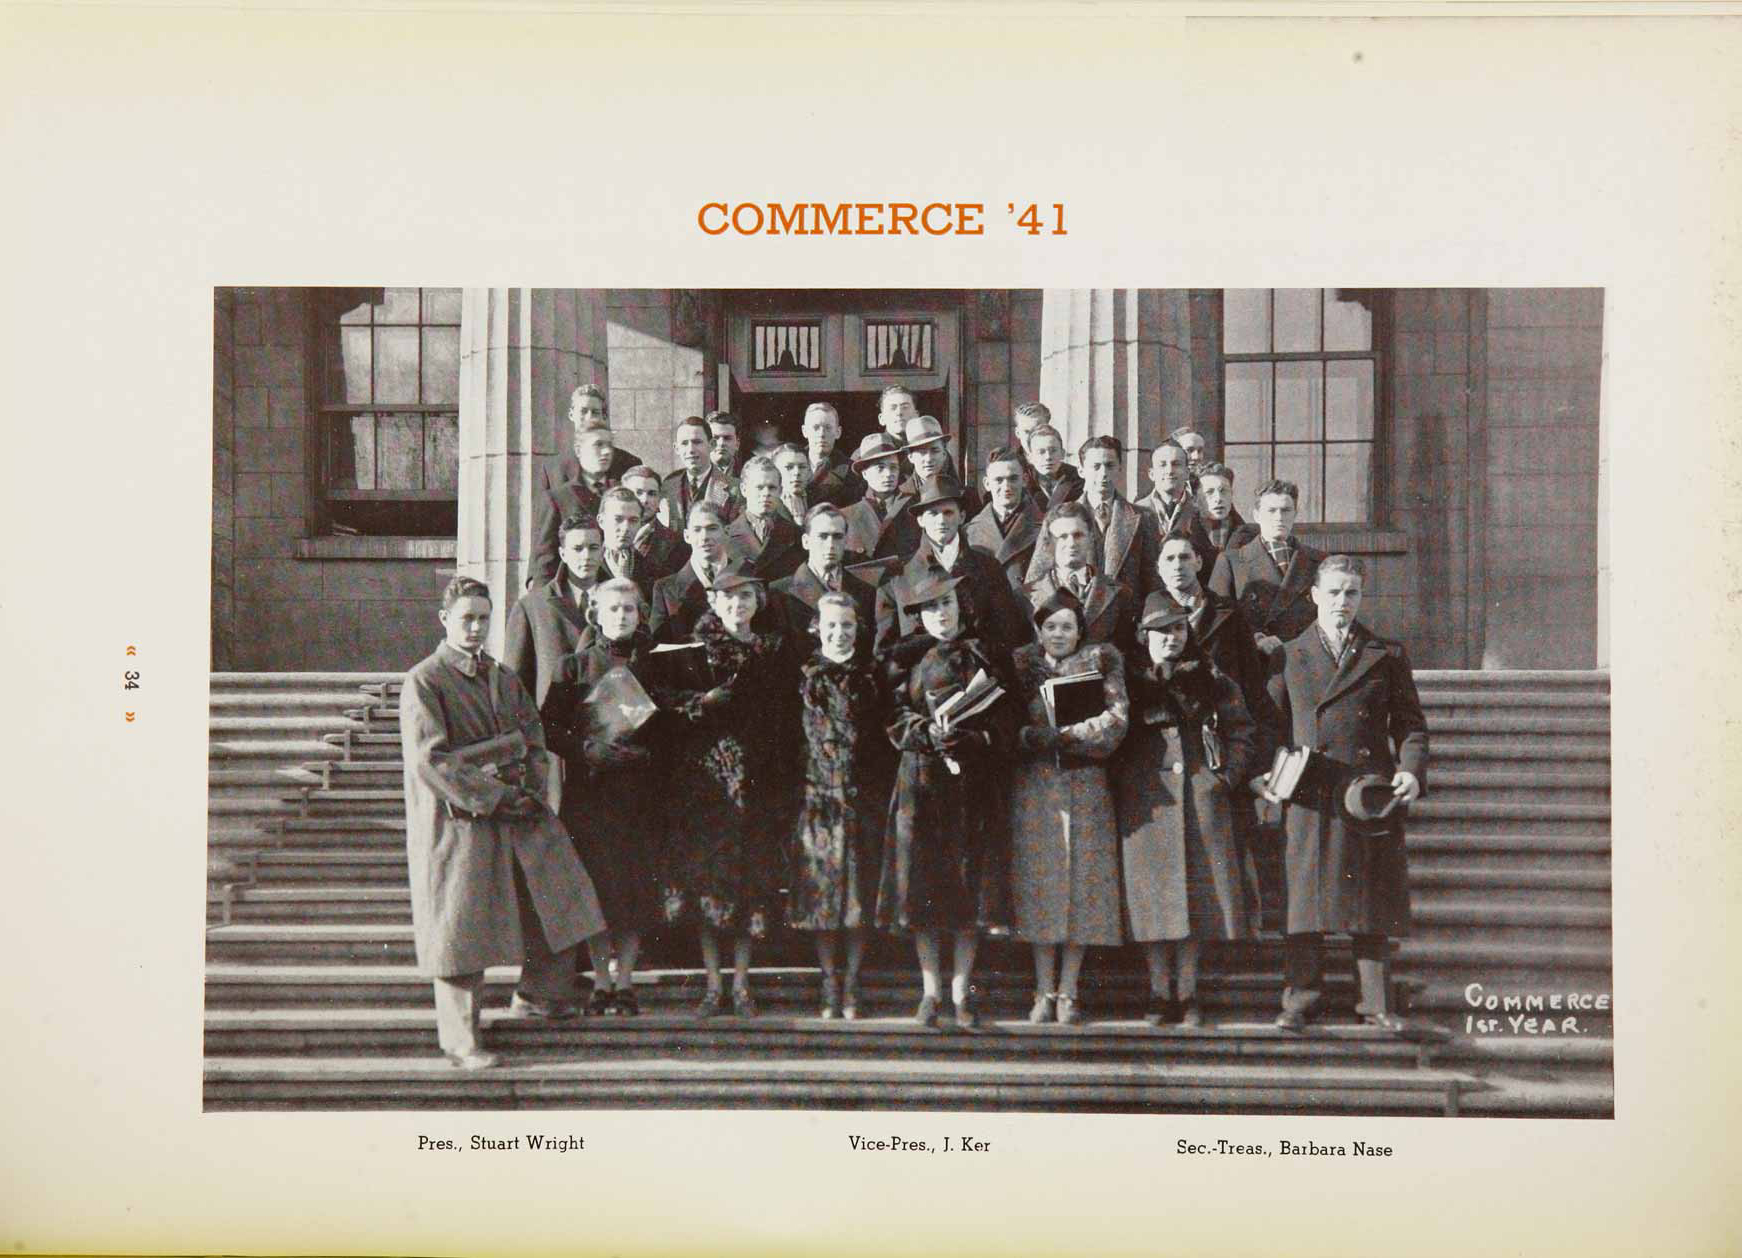 McGill Yearbook: 1938